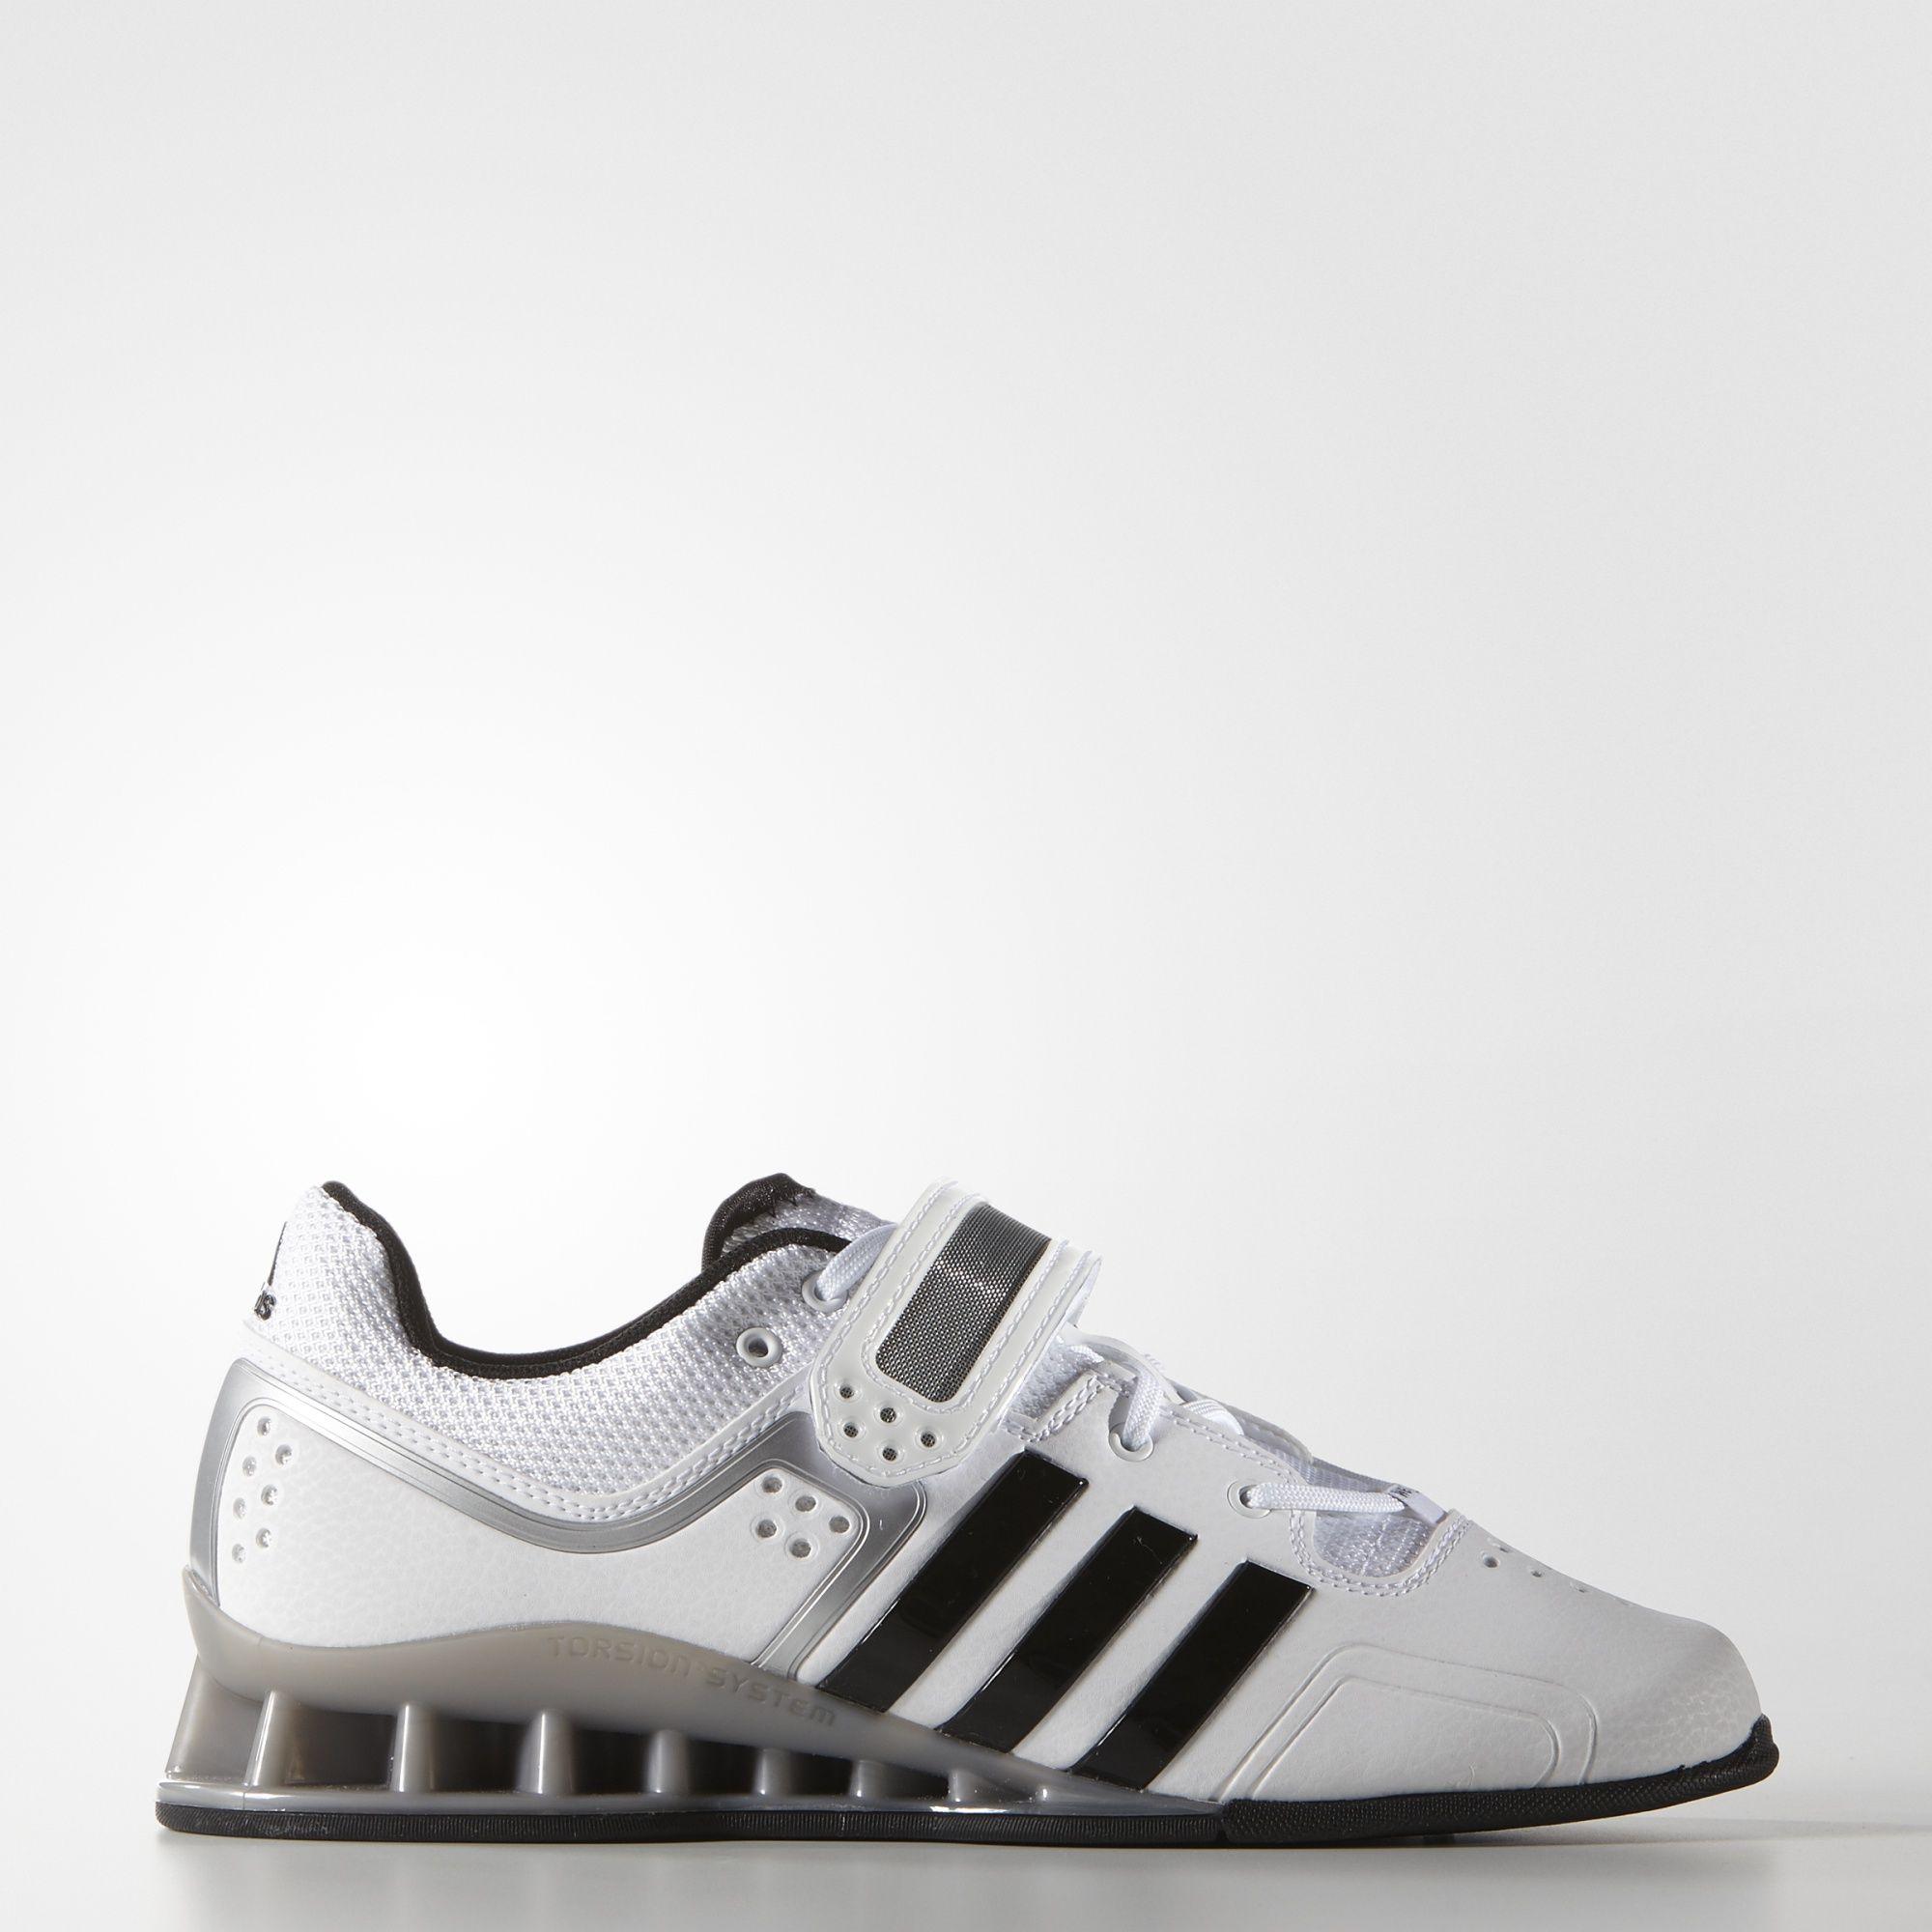 Adidas Weightlifting Logo - Adidas adiPower Weightlifting Shoes Core White Core Black Tech Grey